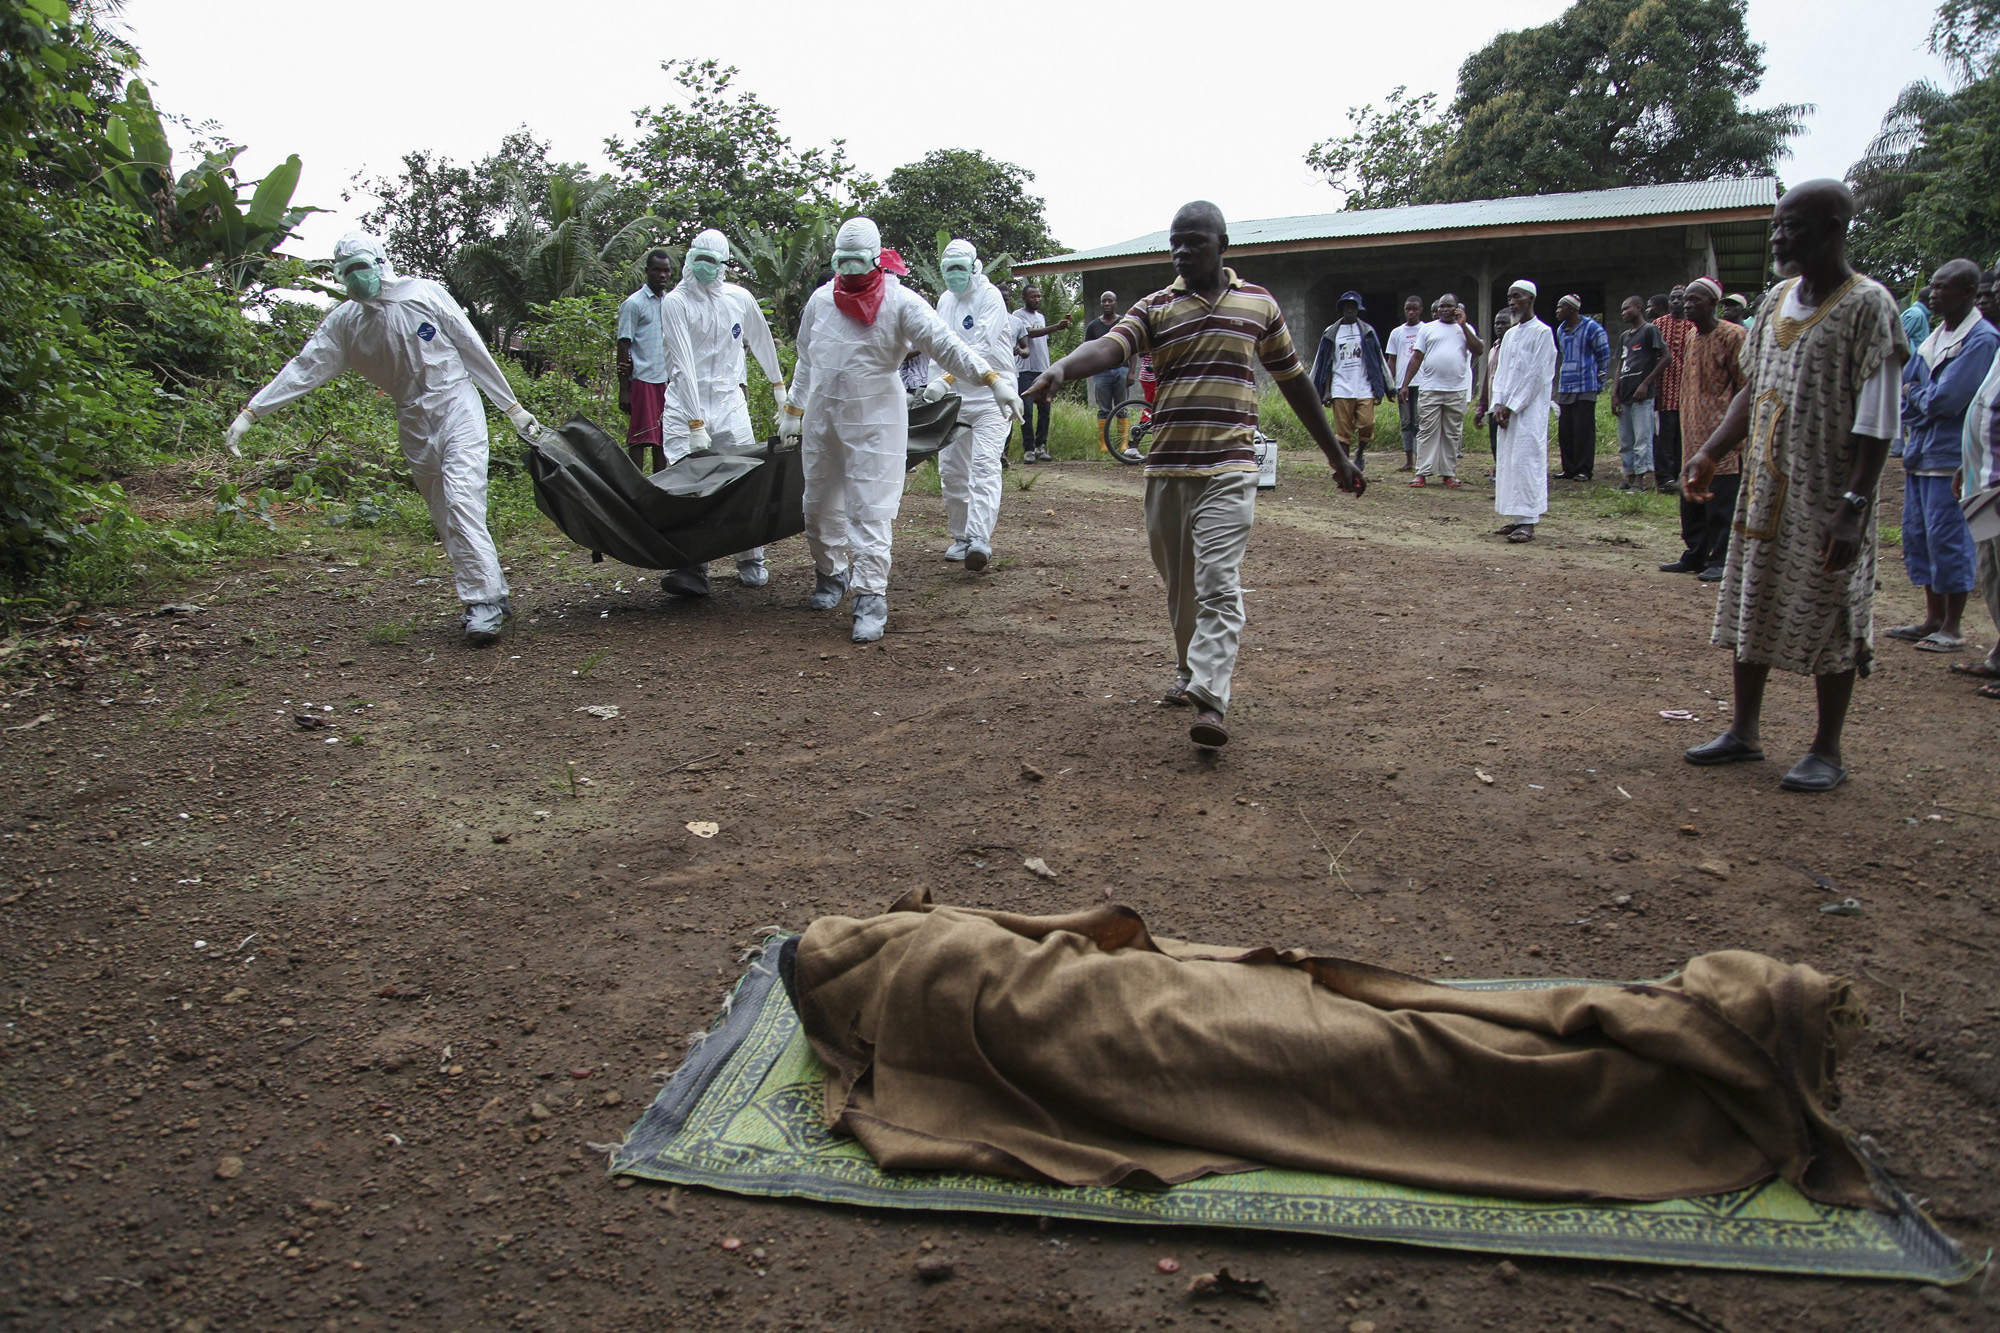 Liberian nurses carry the body of an Ebola victim on the way to bury them in the Banjor Community on the outskirts of Monrovia, Liberia, Aug. 6, 2014.